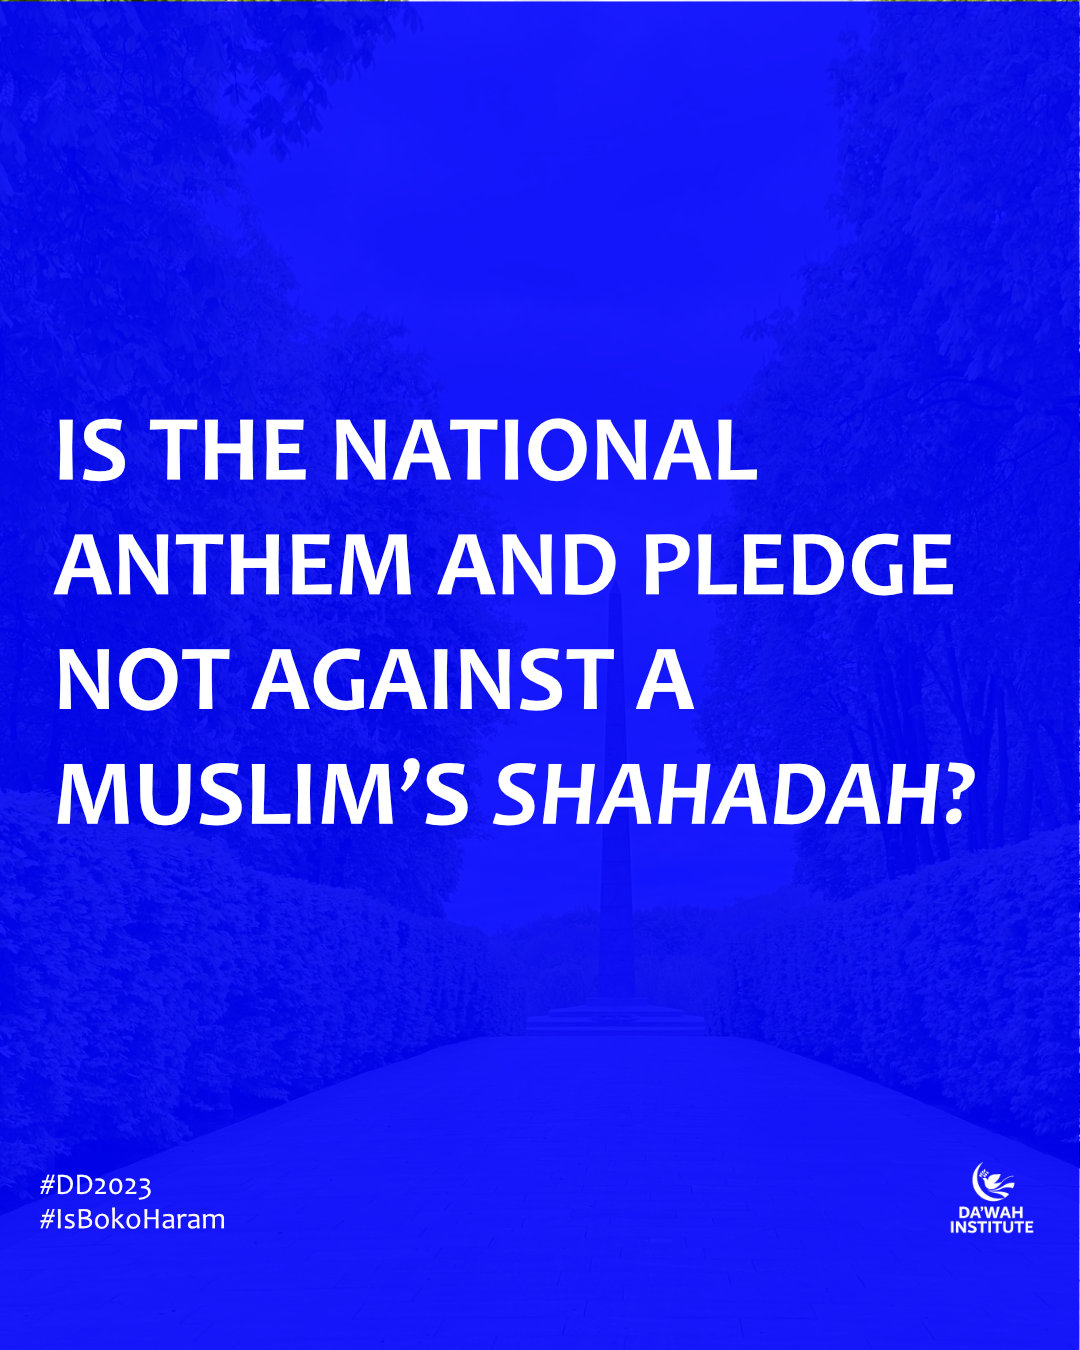 Is the national anthem and pledge not against a Muslim’s Shahadah